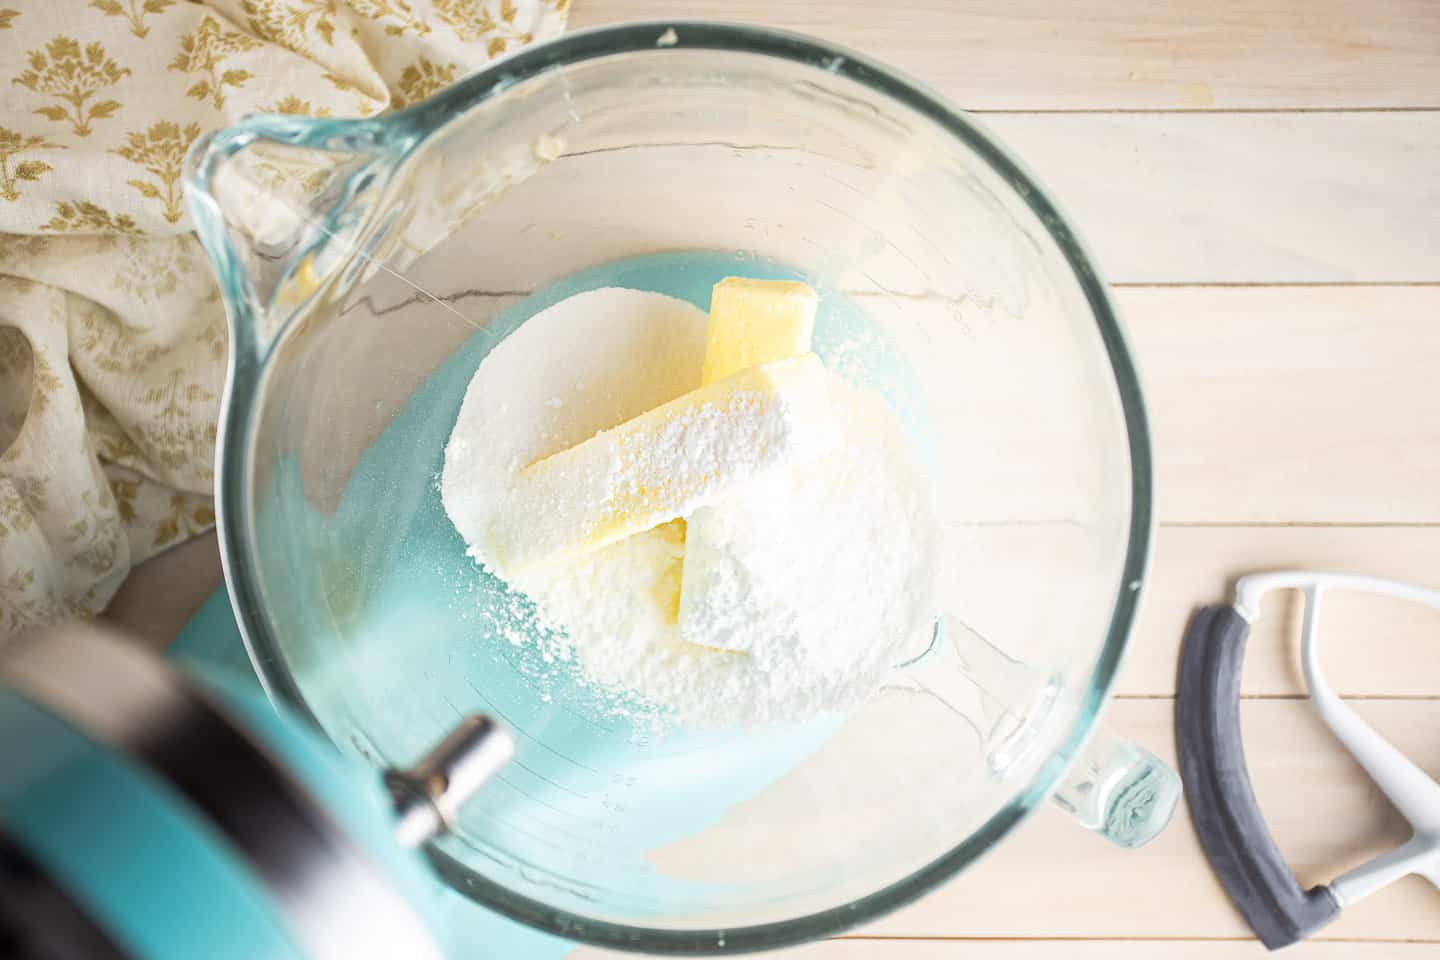 Butter, sugar, and powdered sugar in a large glass mixing bowl.